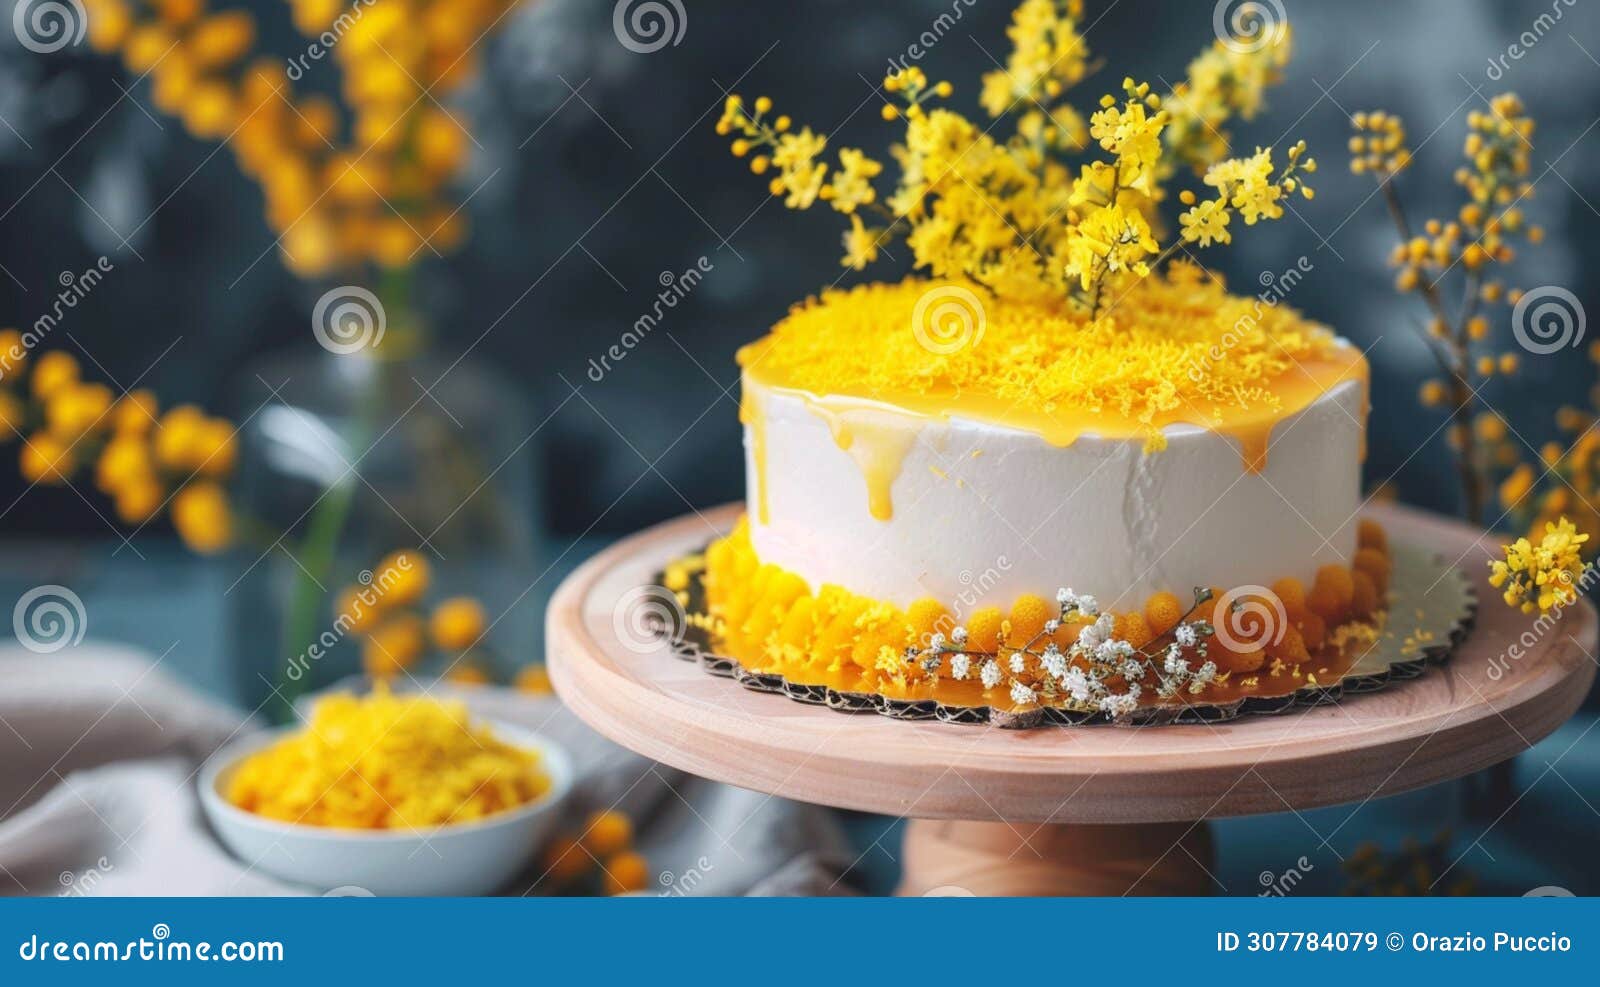 sweet elegance: mimosa cake for women's day, union of taste and refinement.